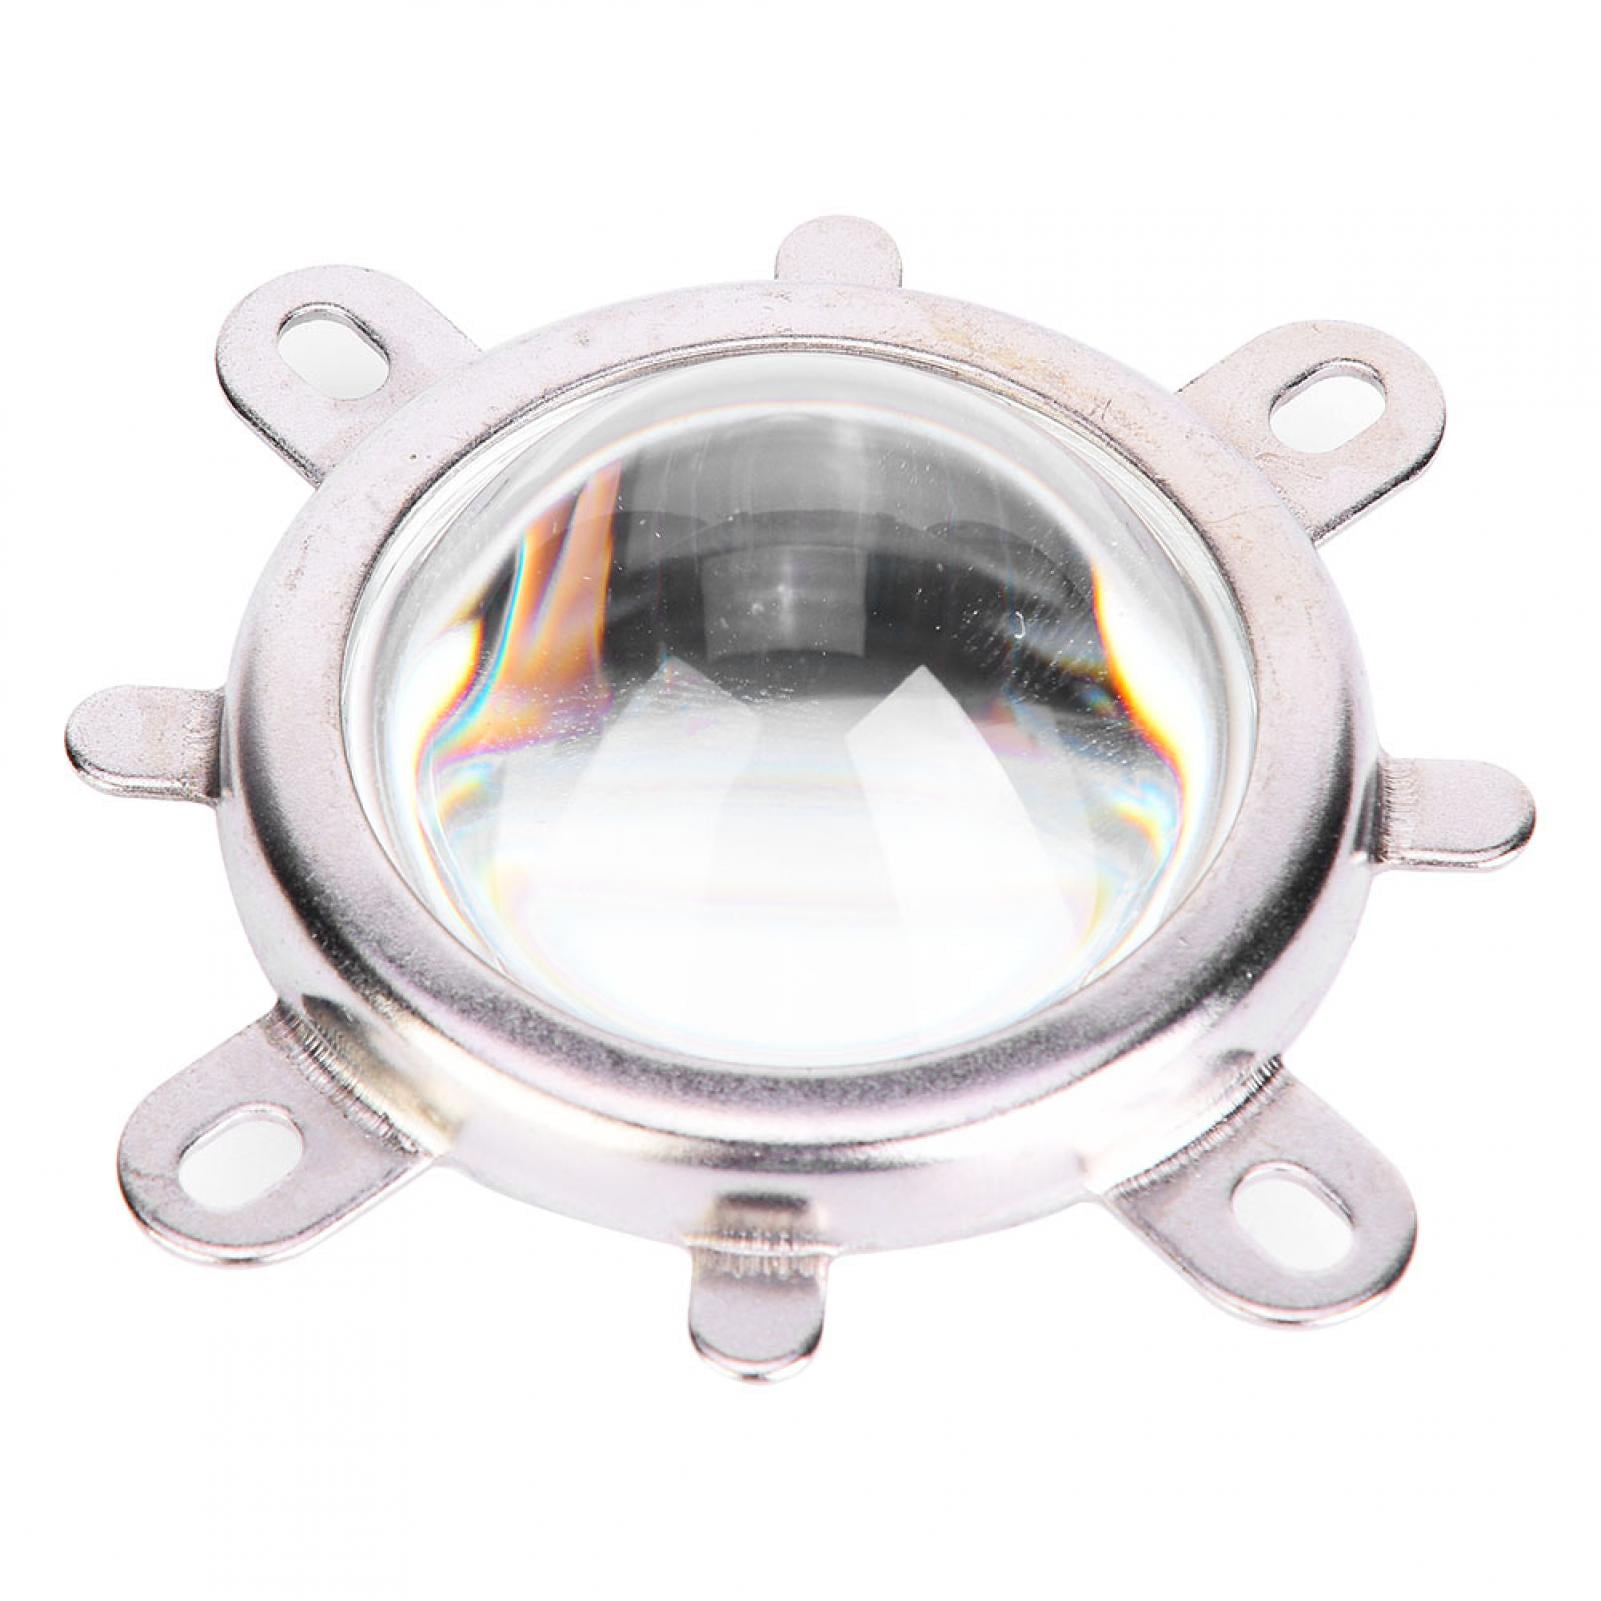 Reflector Collimator 44mm Lens Fixed Mount for 20W-100W LED Fashion New *_